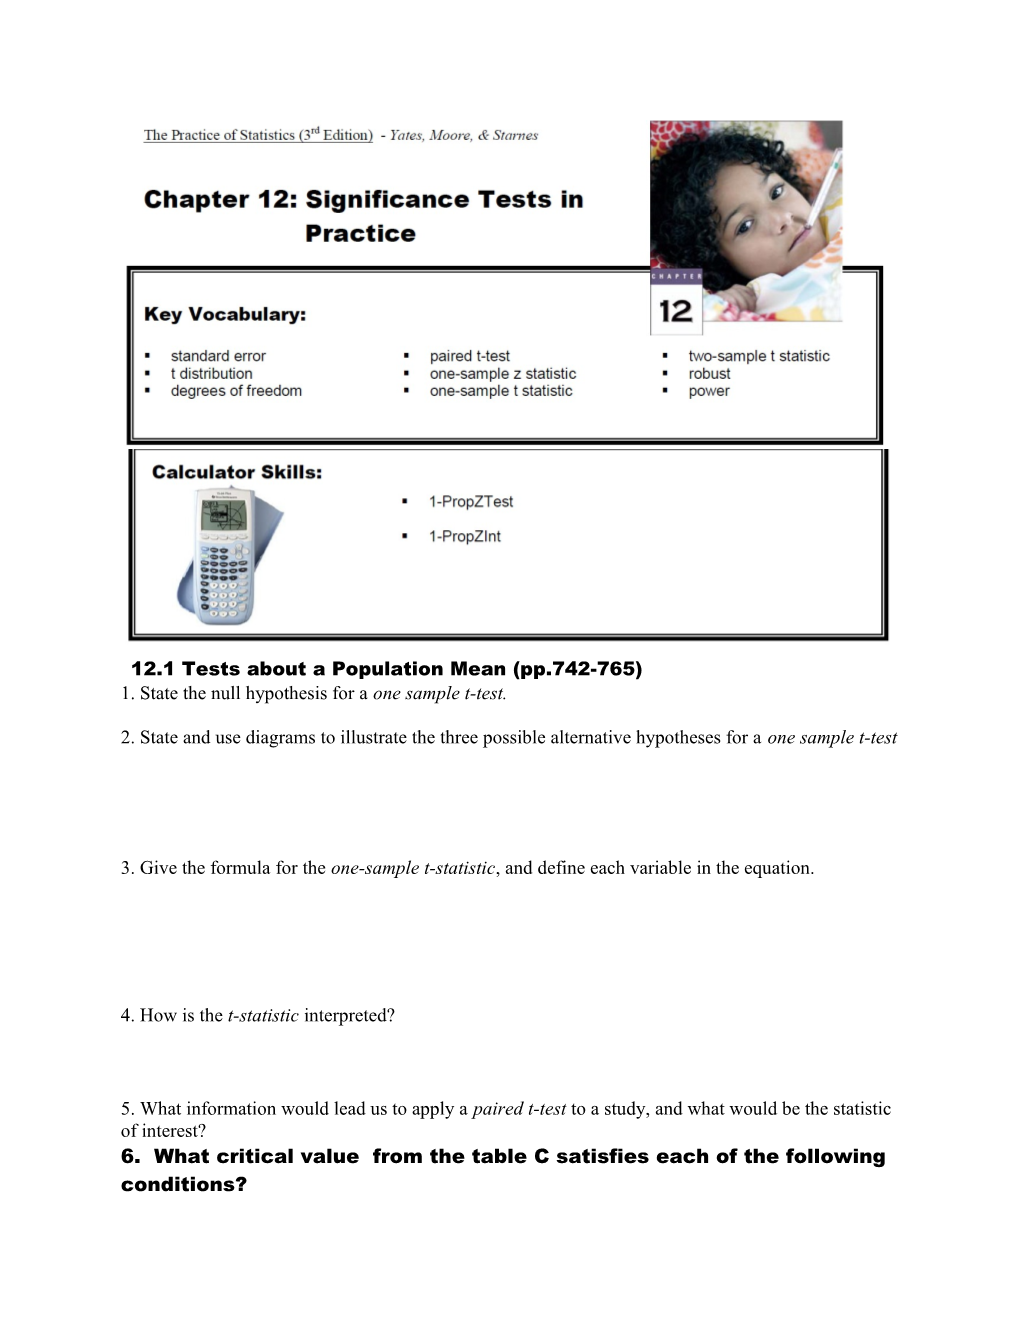 1. State the Null Hypothesis for a One Sample T-Test